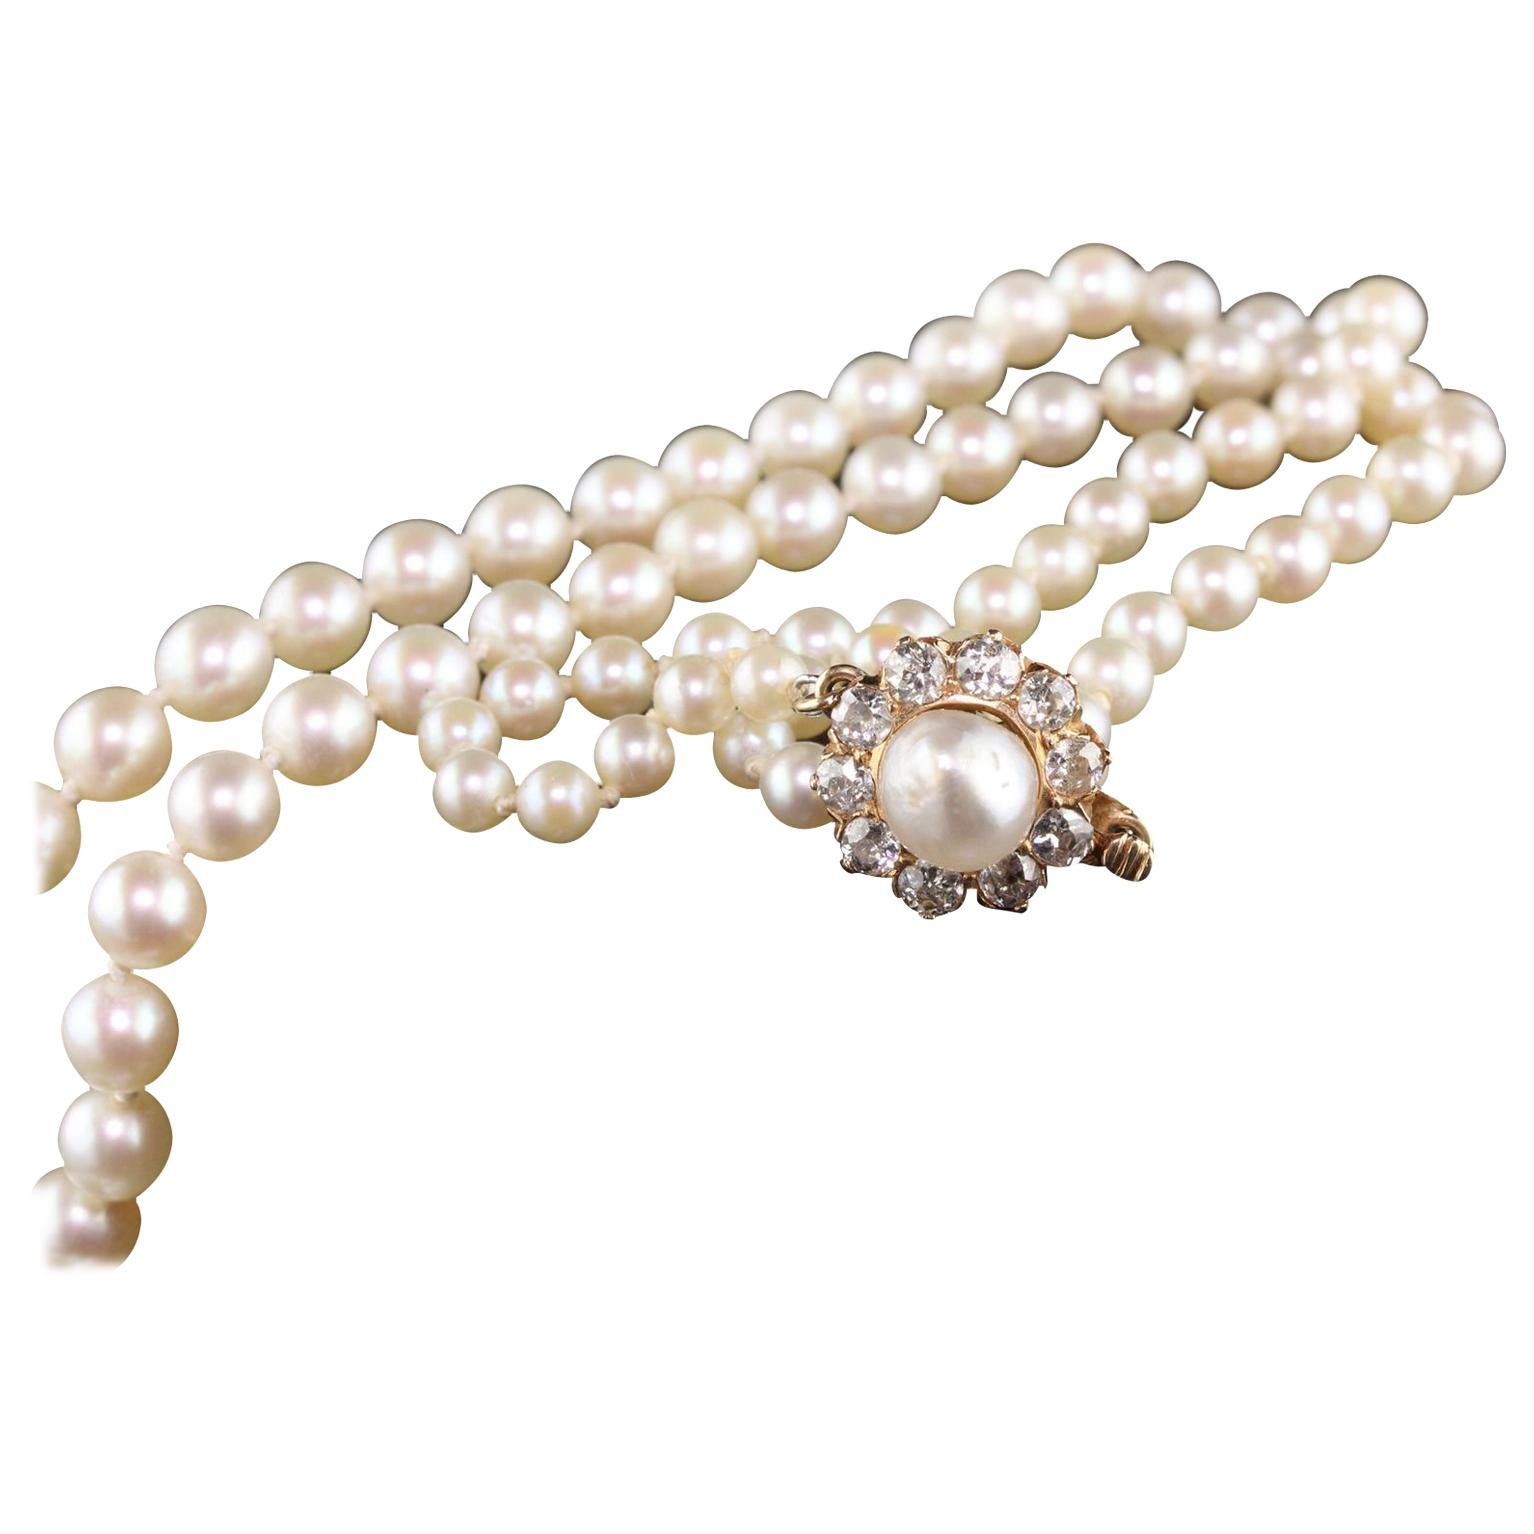 Vintage GIA Certified Pearl Necklace with Diamonds